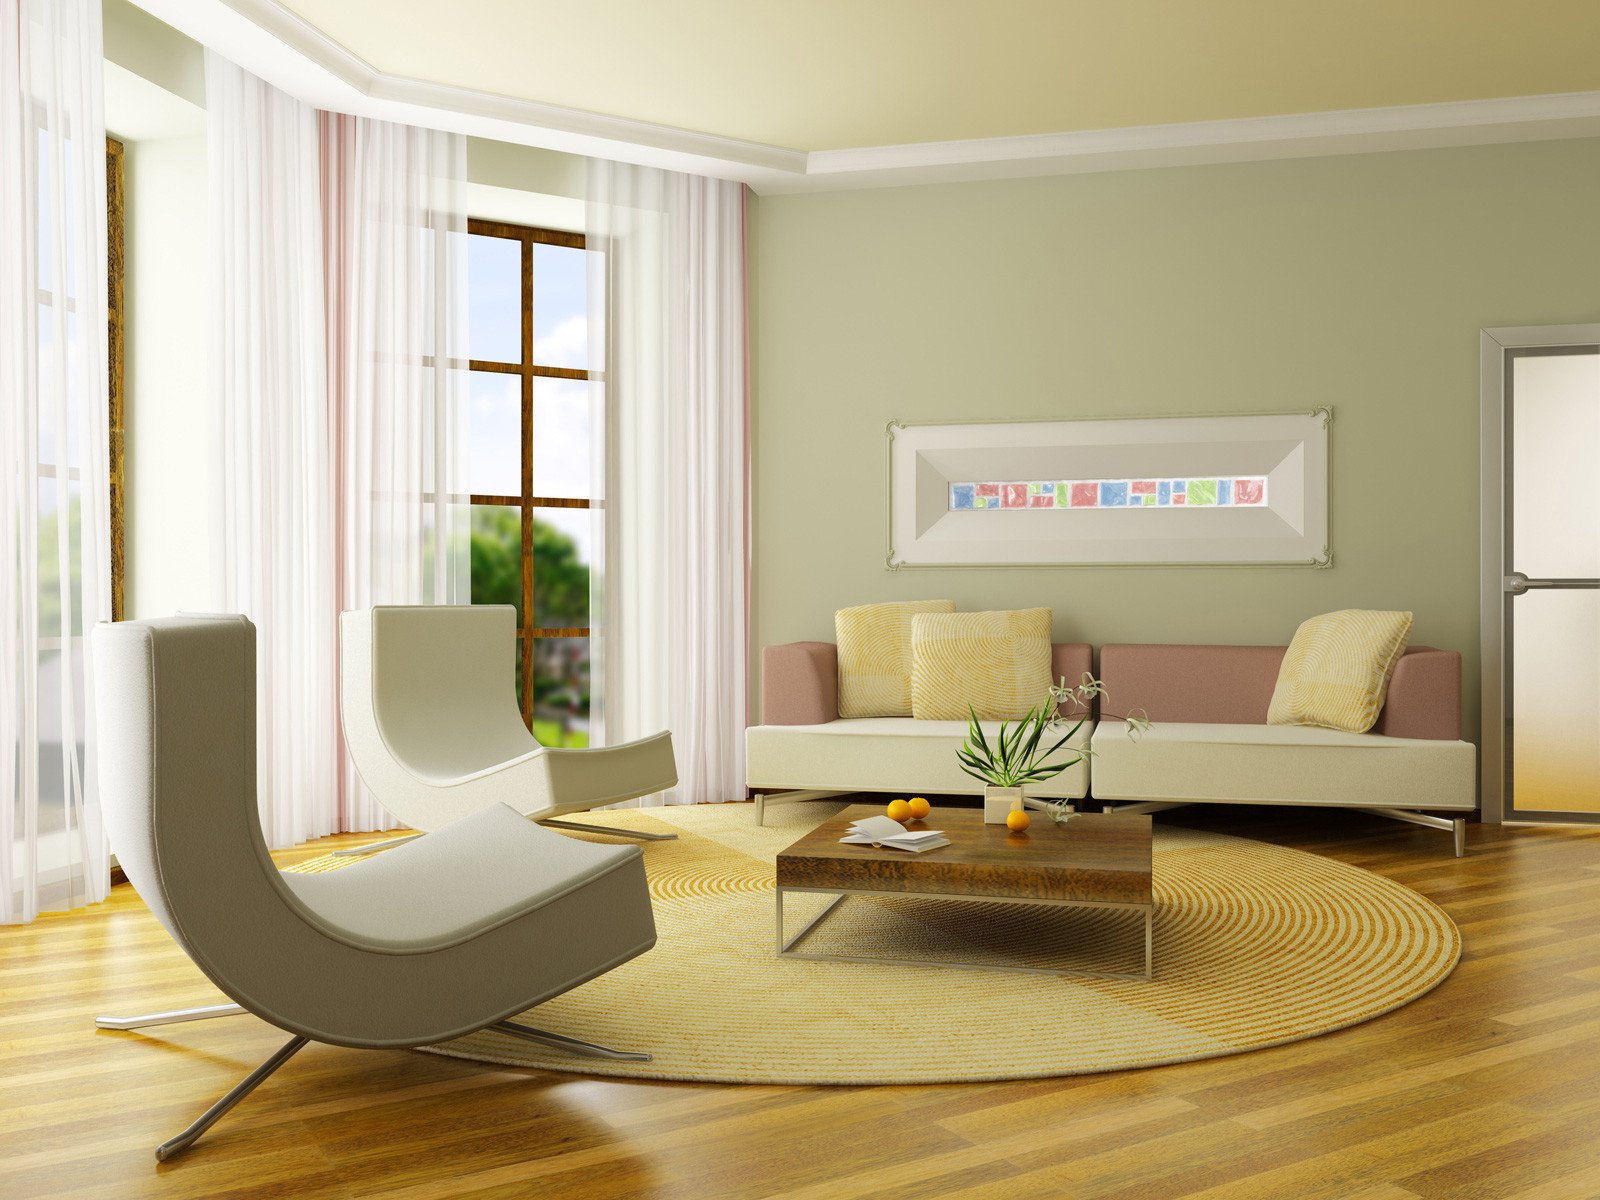 Small Living Roompaint Ideas Paint Ideas for Living Room with Narrow Space theydesign